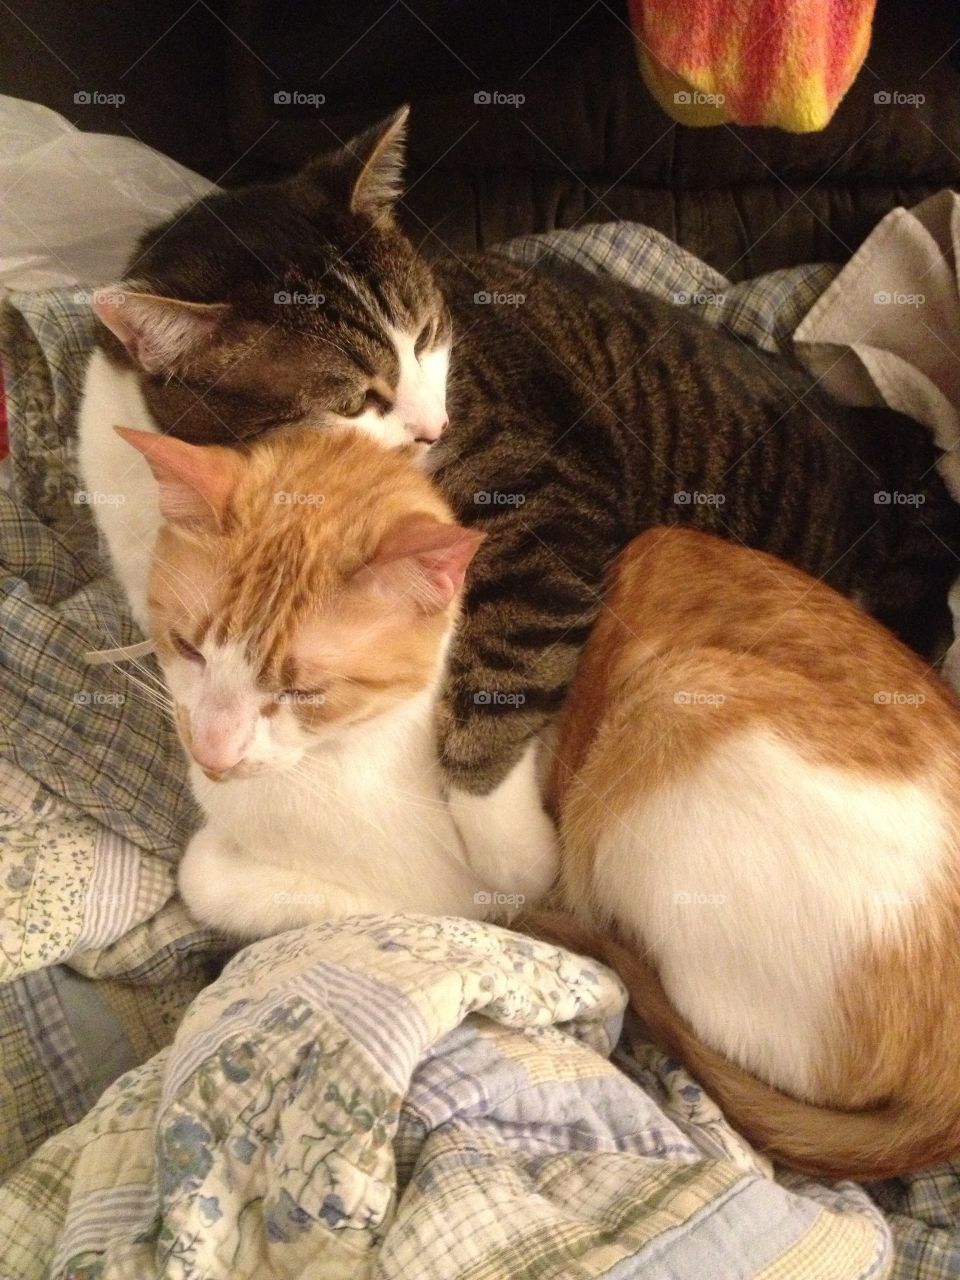 Kitty Cuddle Time.